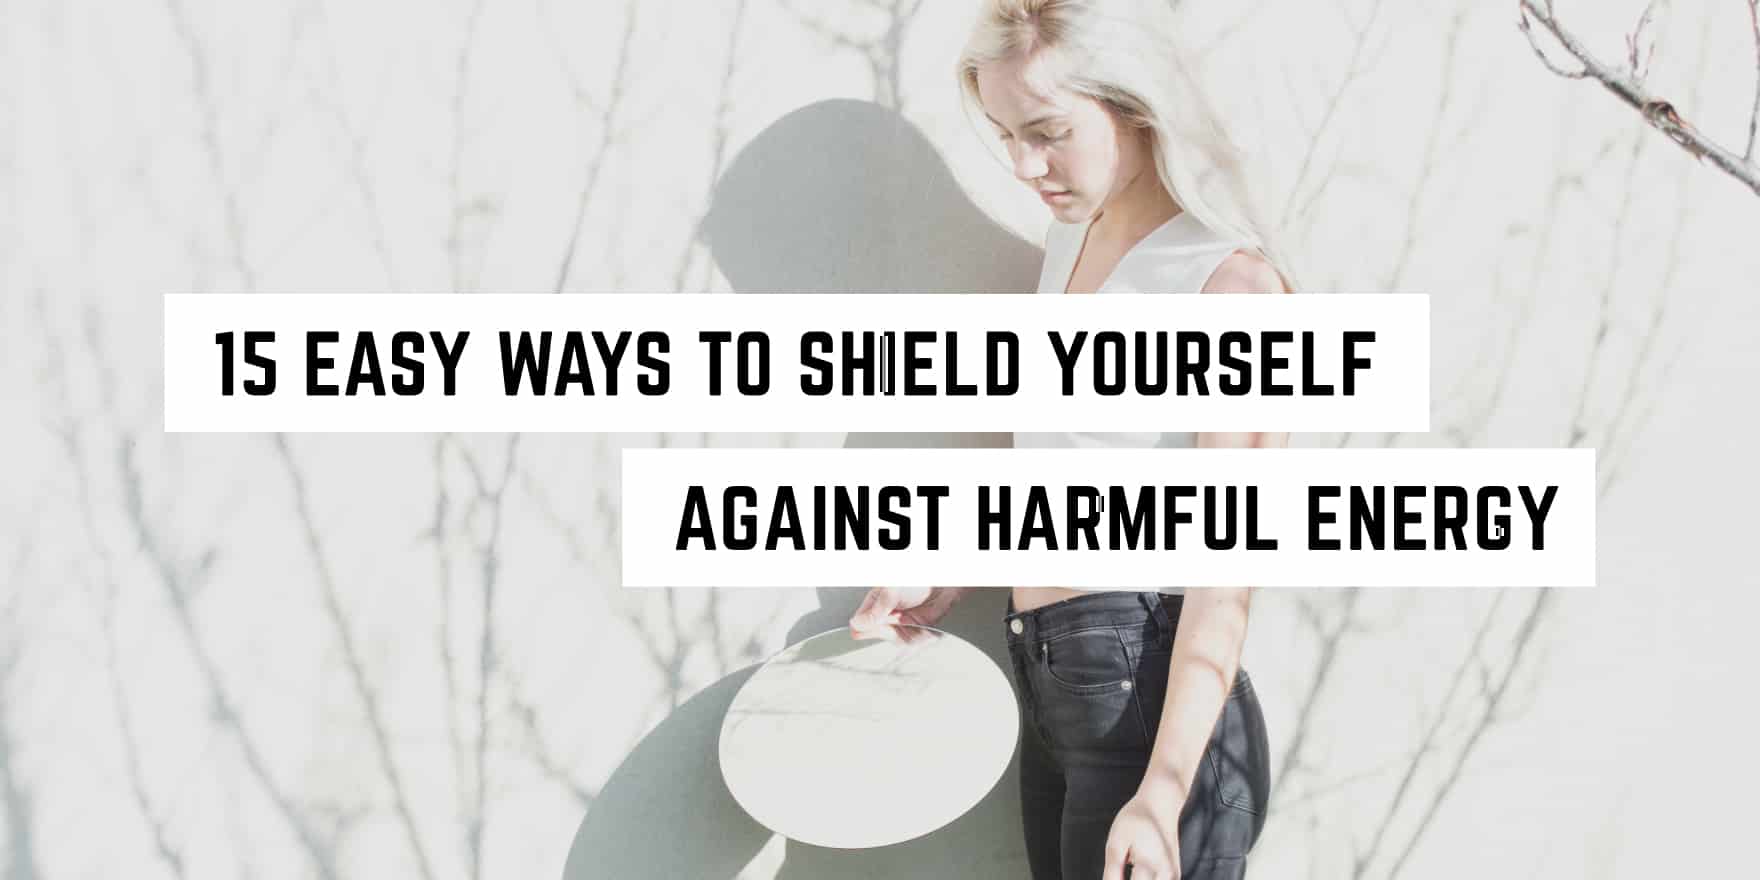 15 Ways to Shield Yourself against Harmful Energy